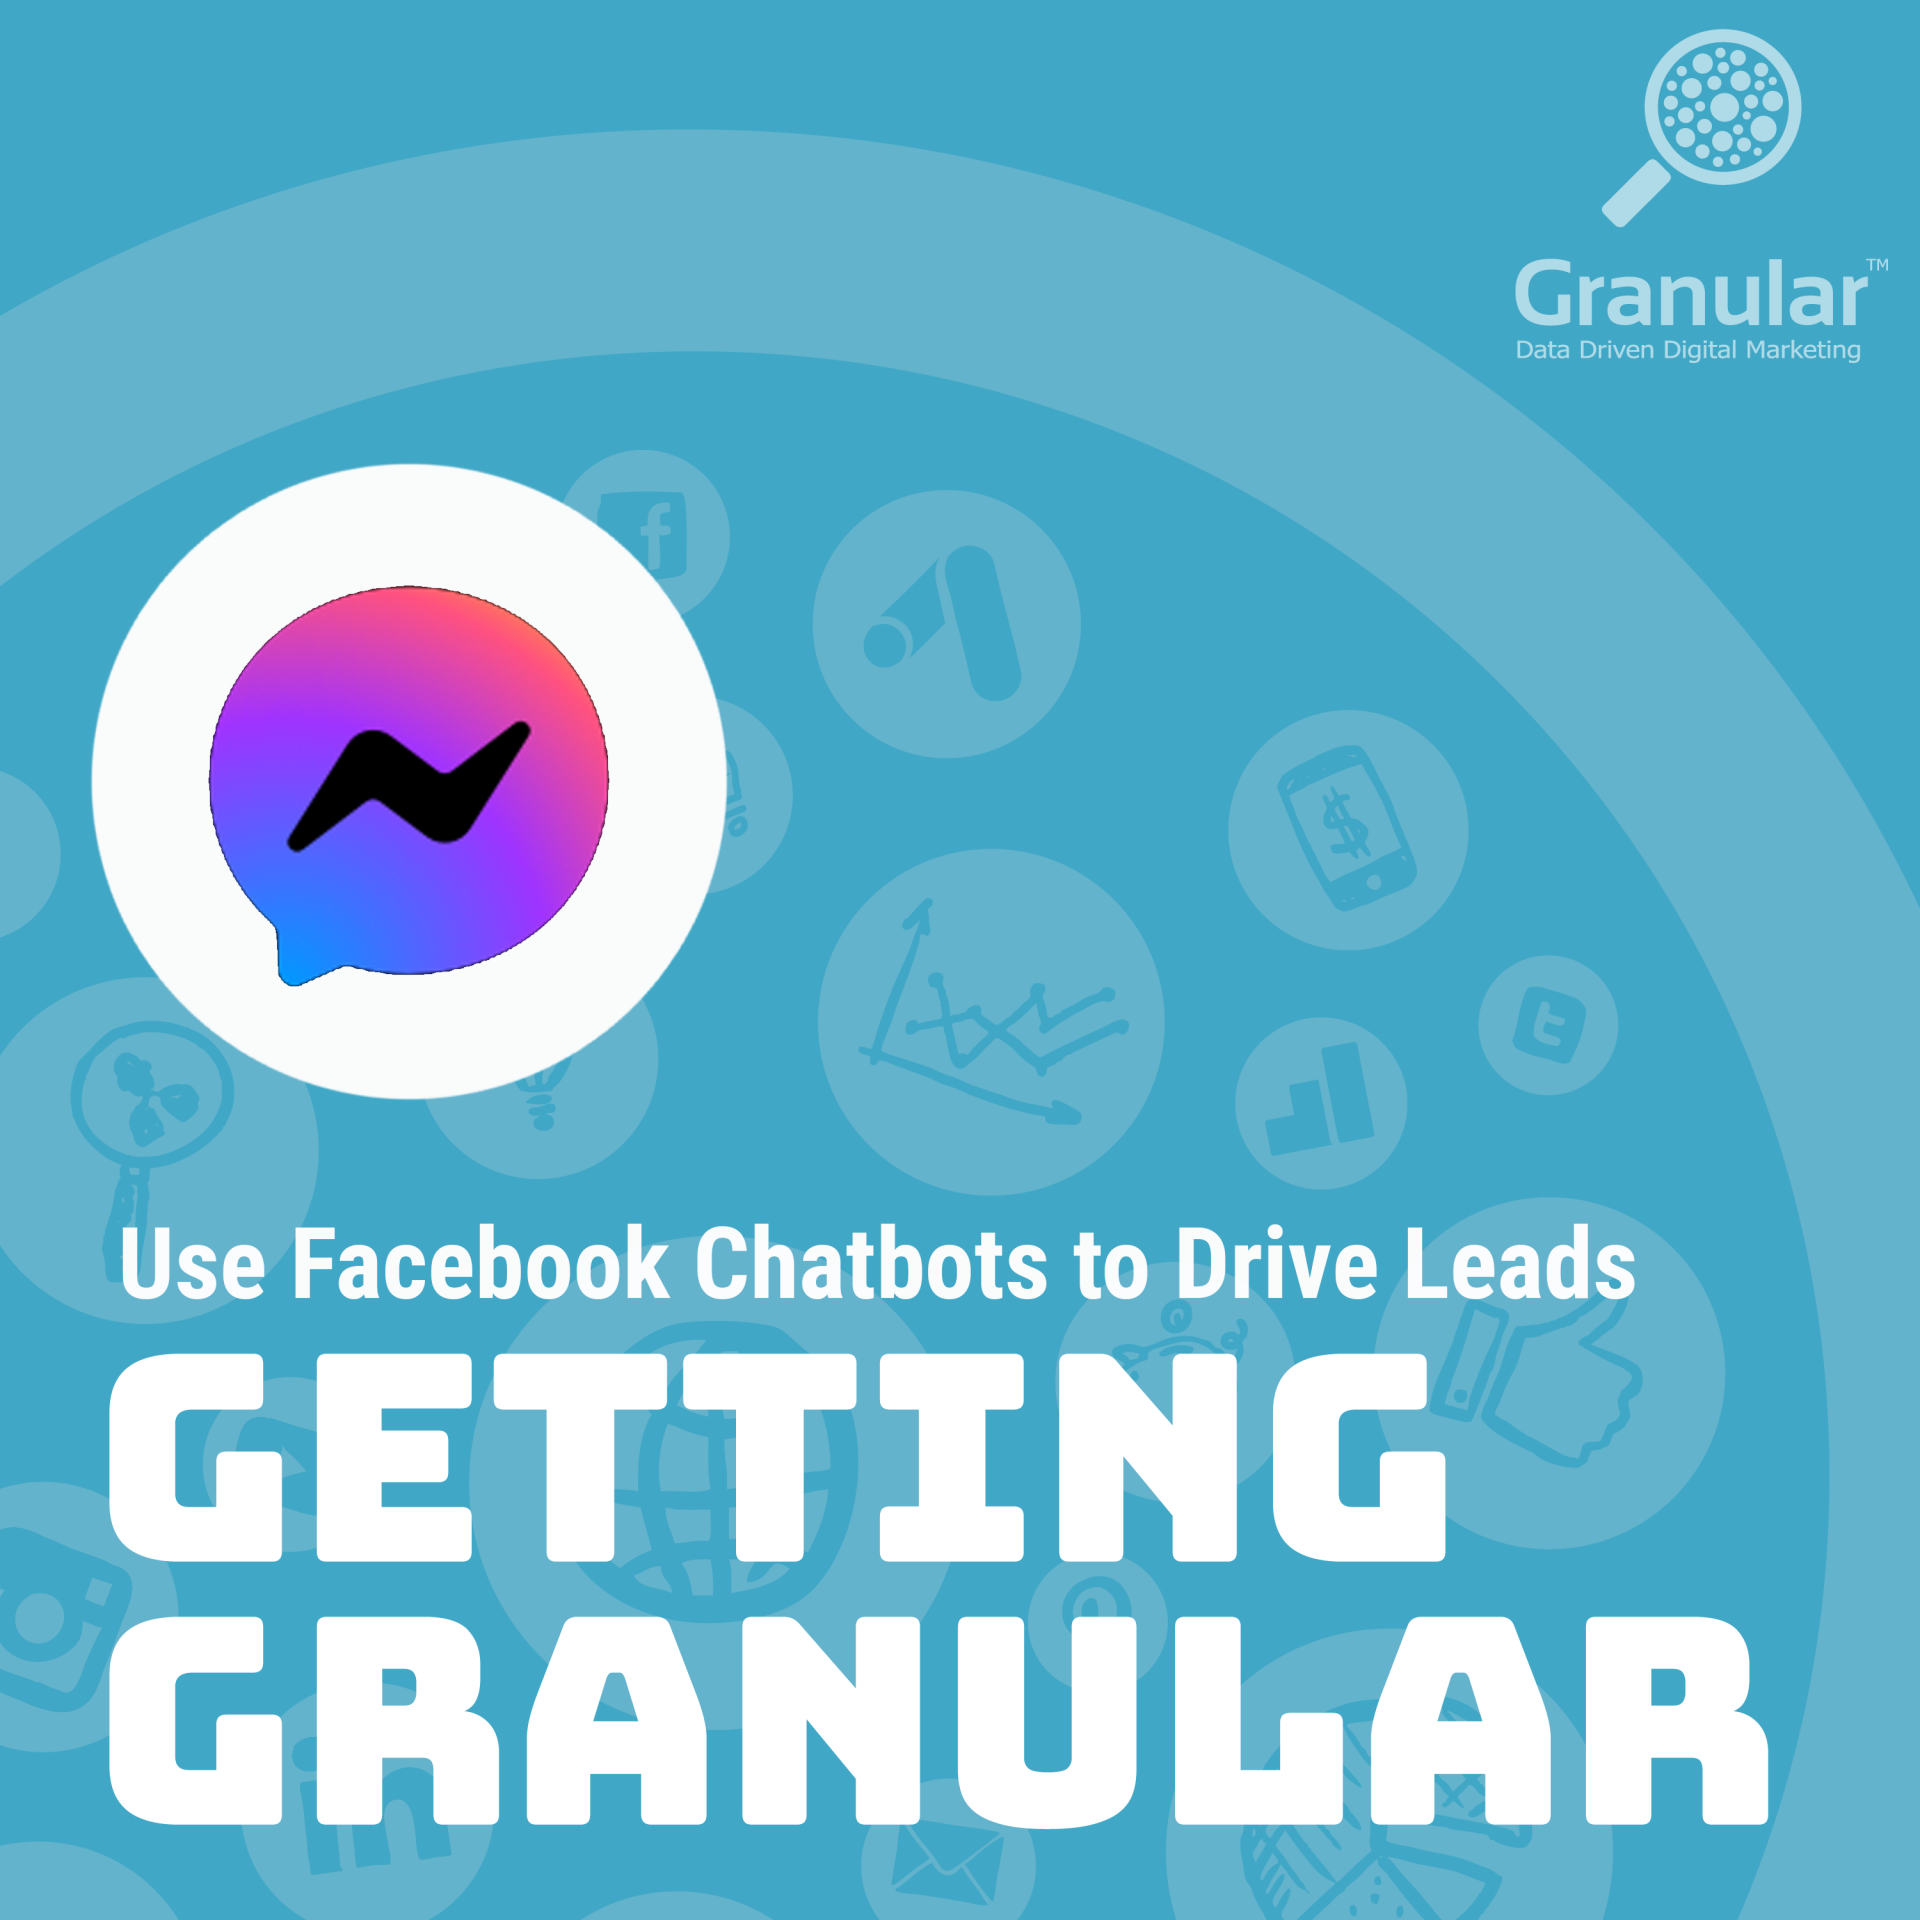 Granular Podcast: Getting Granular - Use Facebook and Chatbots to Drive Leads